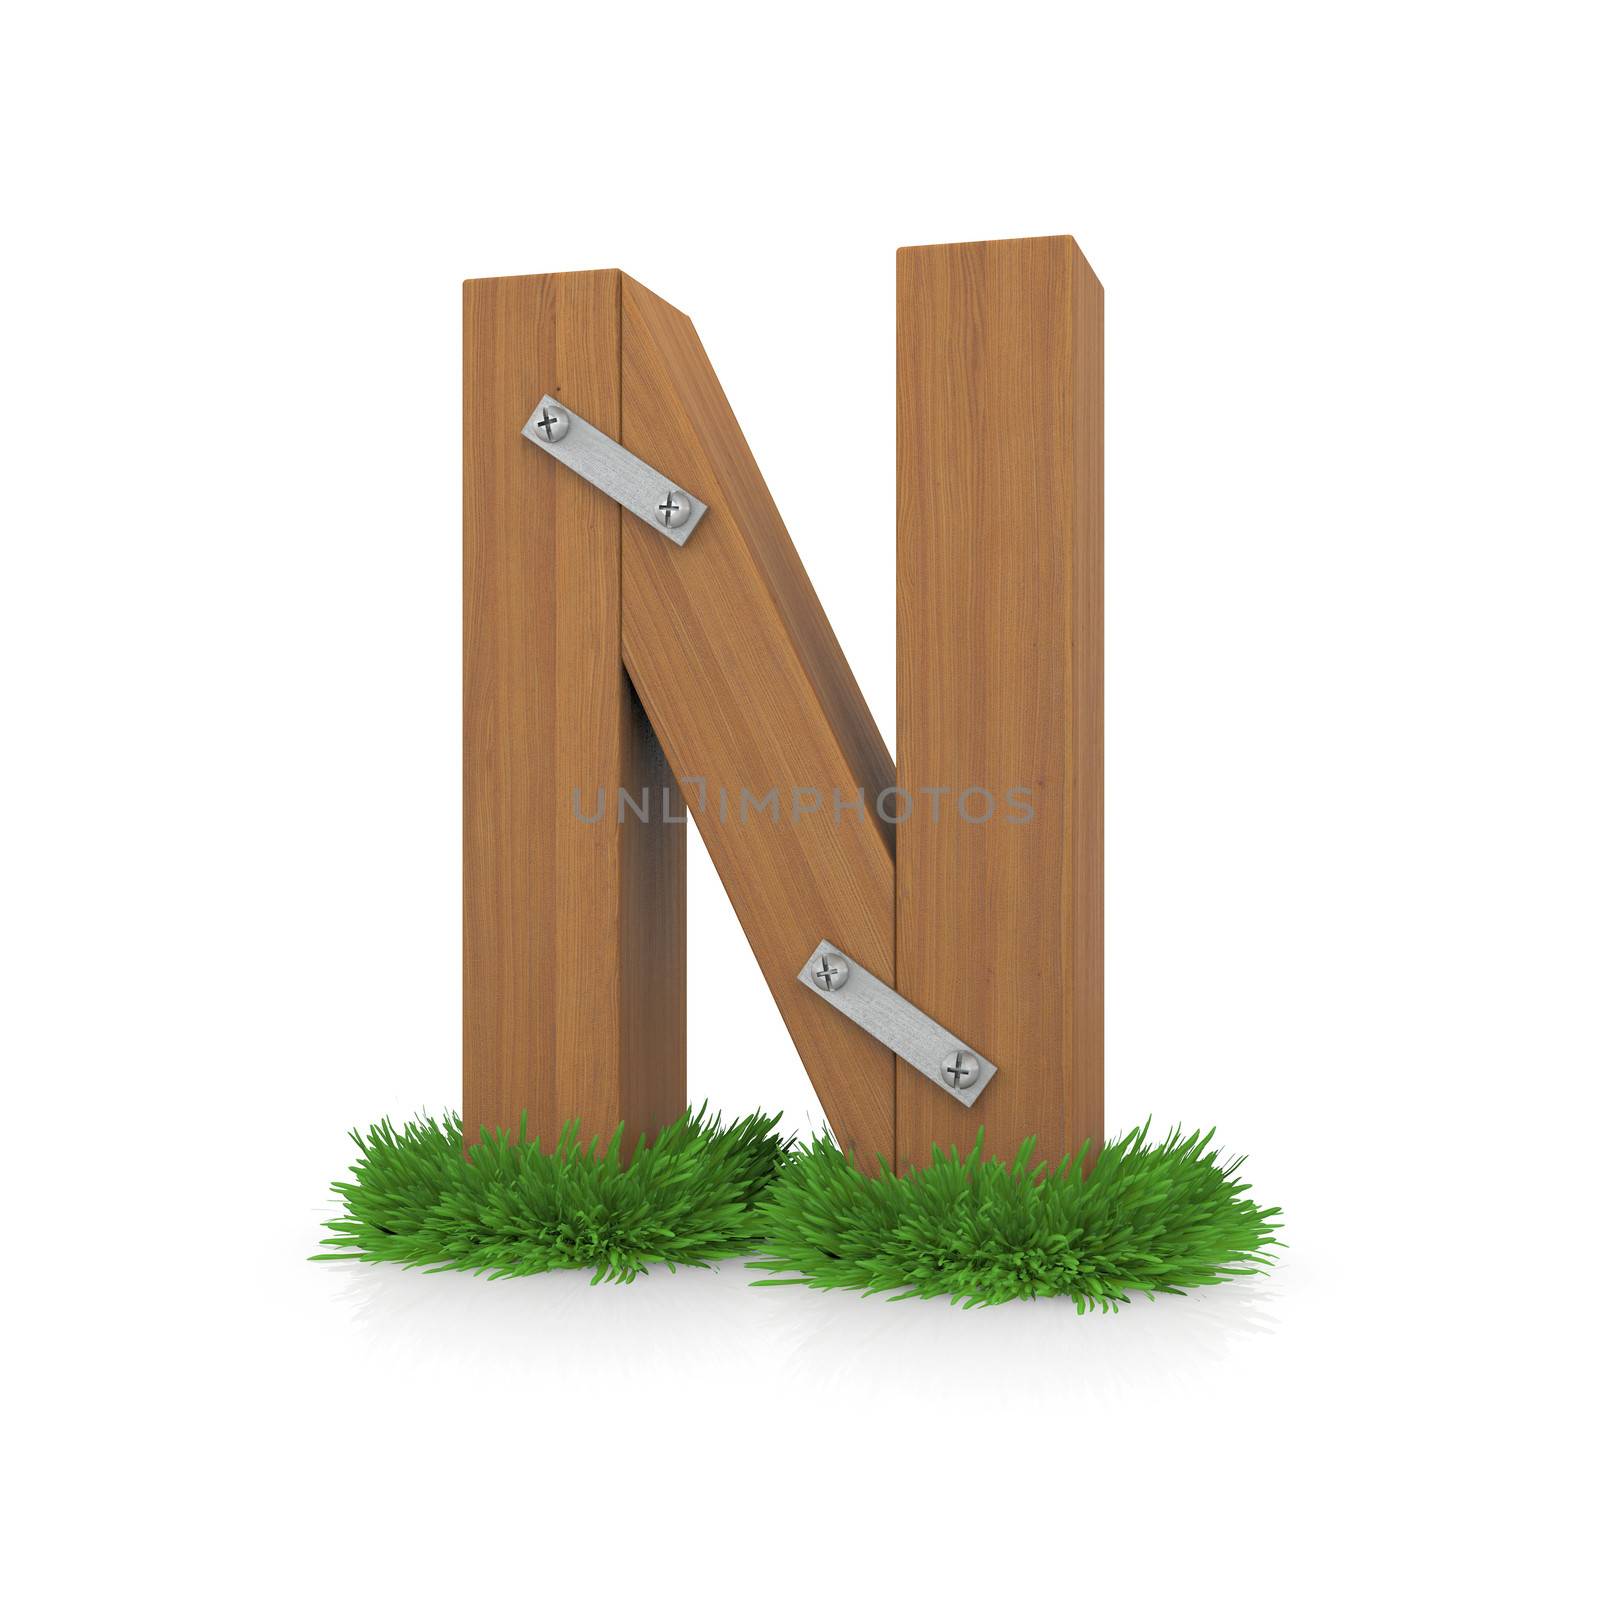 Wooden letter N in the grass by cherezoff